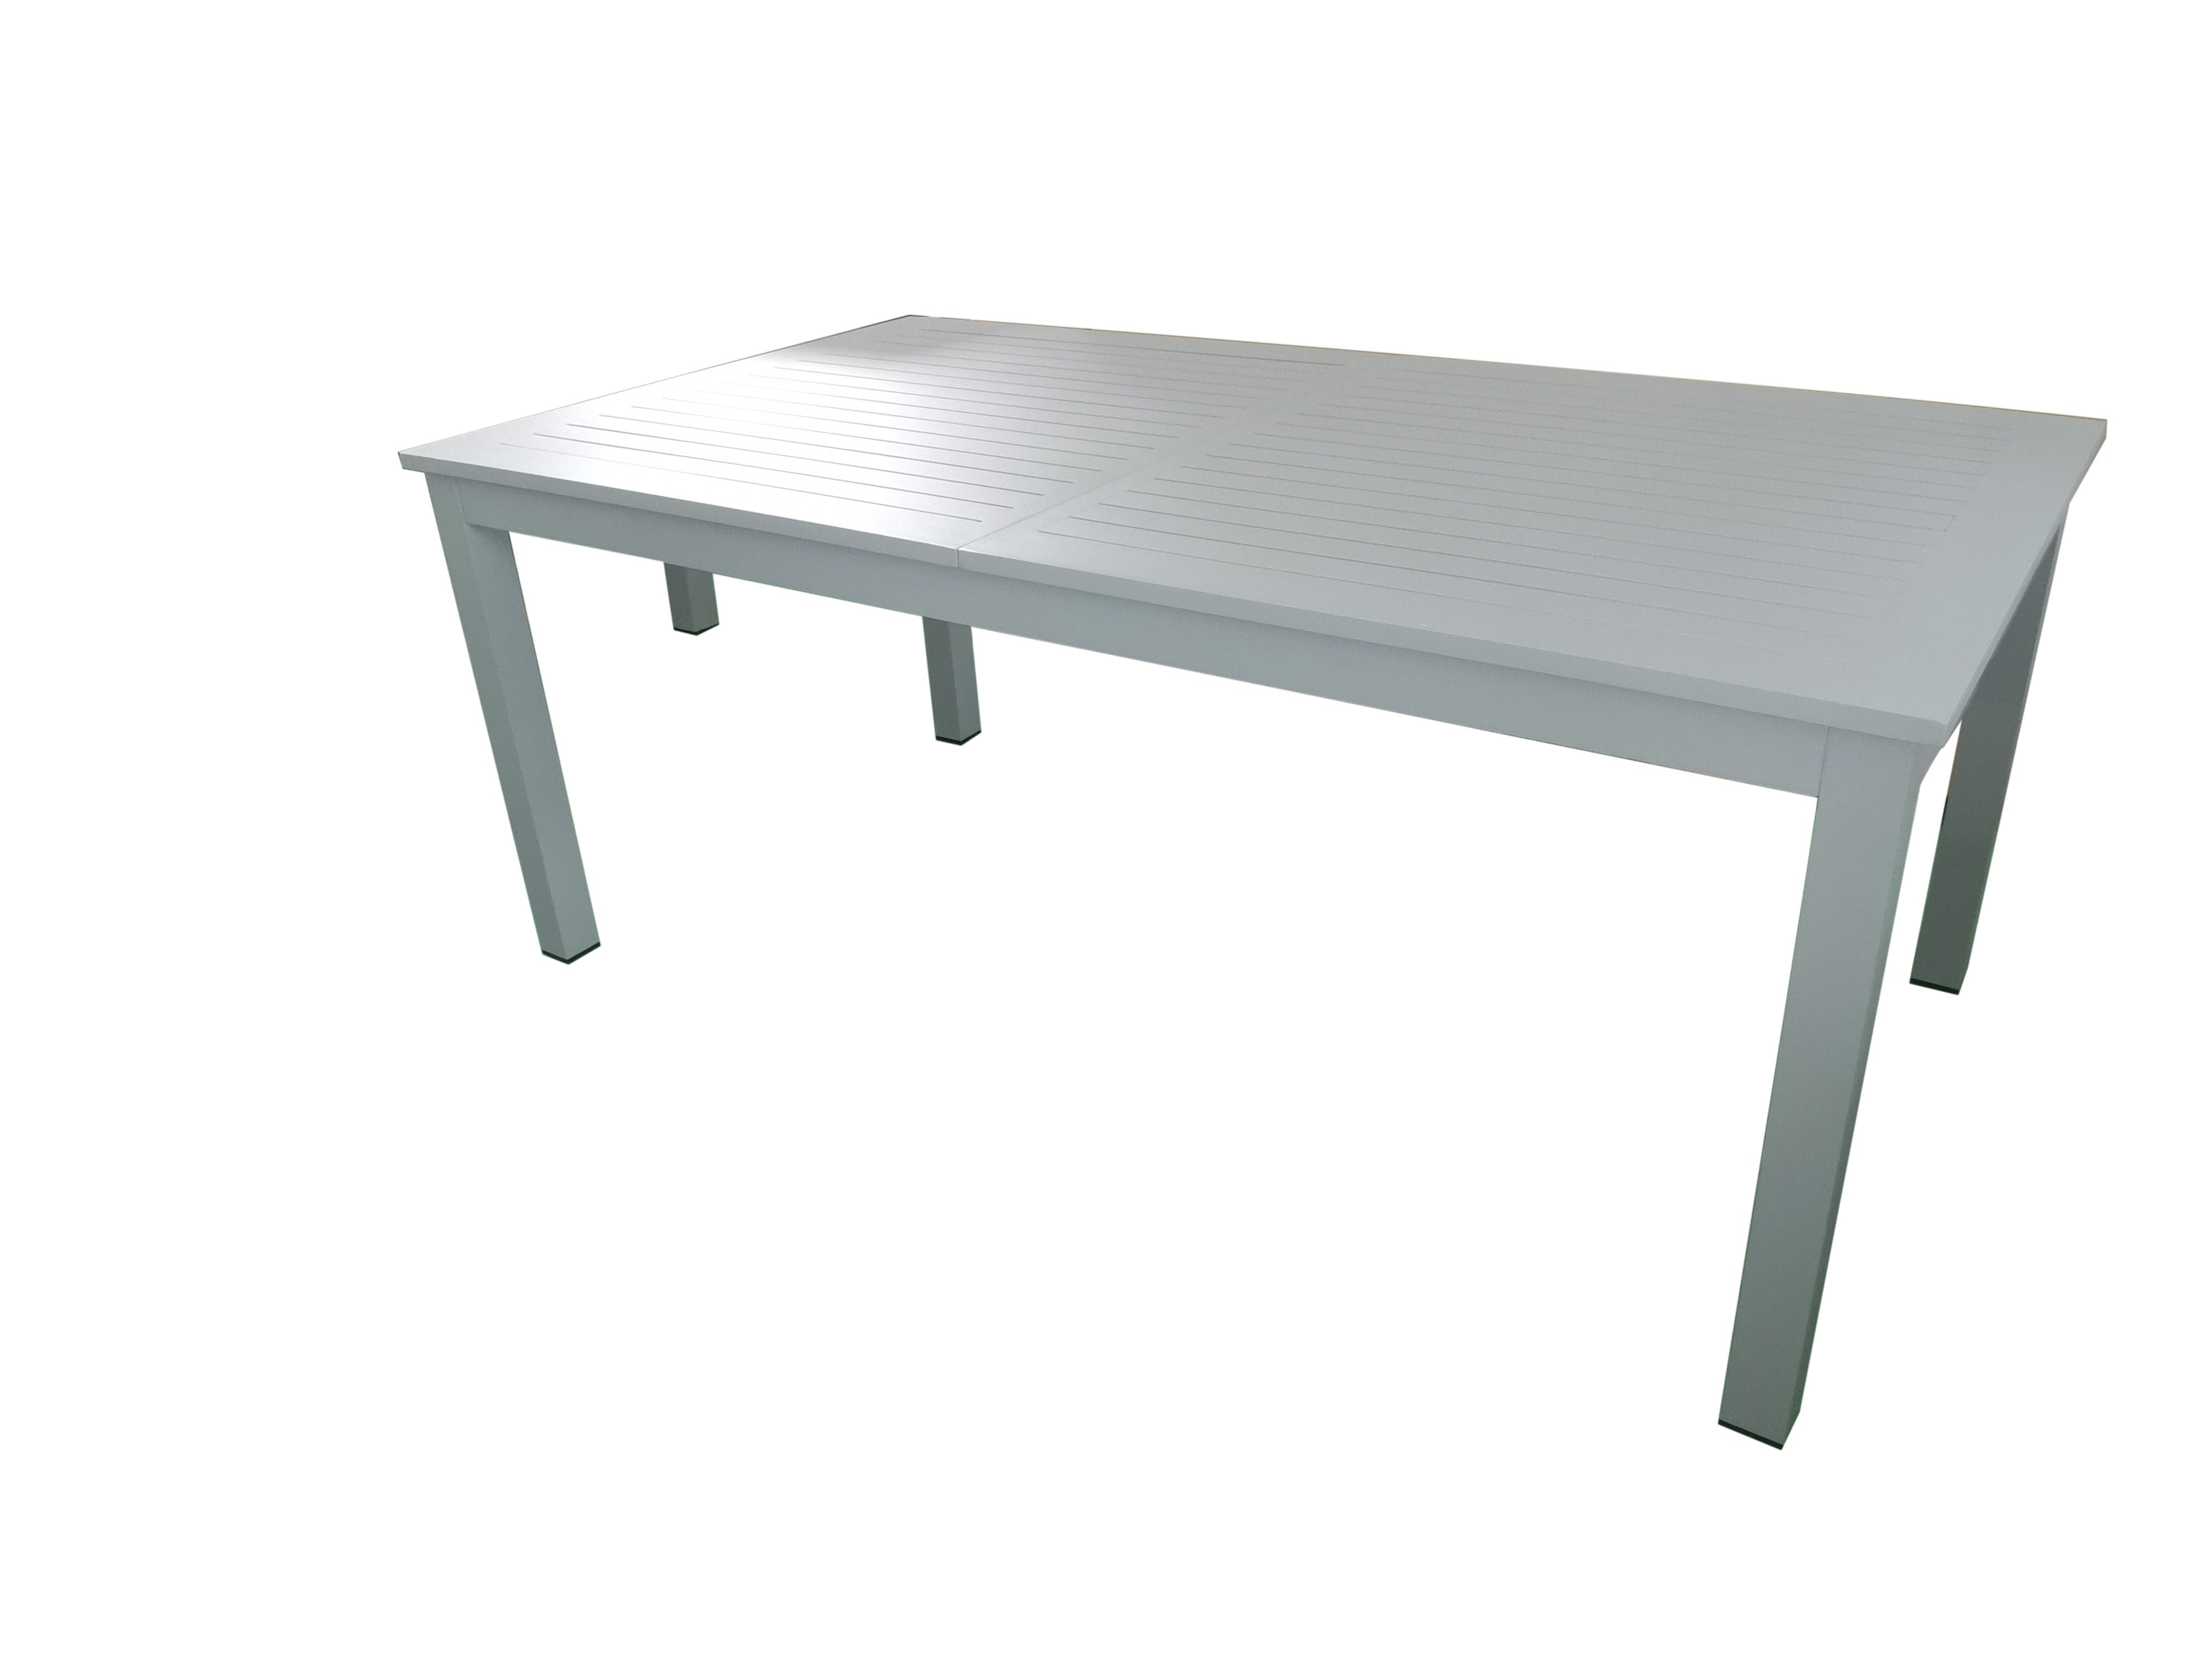 PatioZone Extendable Dining Table with Slated Tabletop (Butterfly Mechanism) Aluminum Frame (MOSS-T206GP) - Matte Light Grey